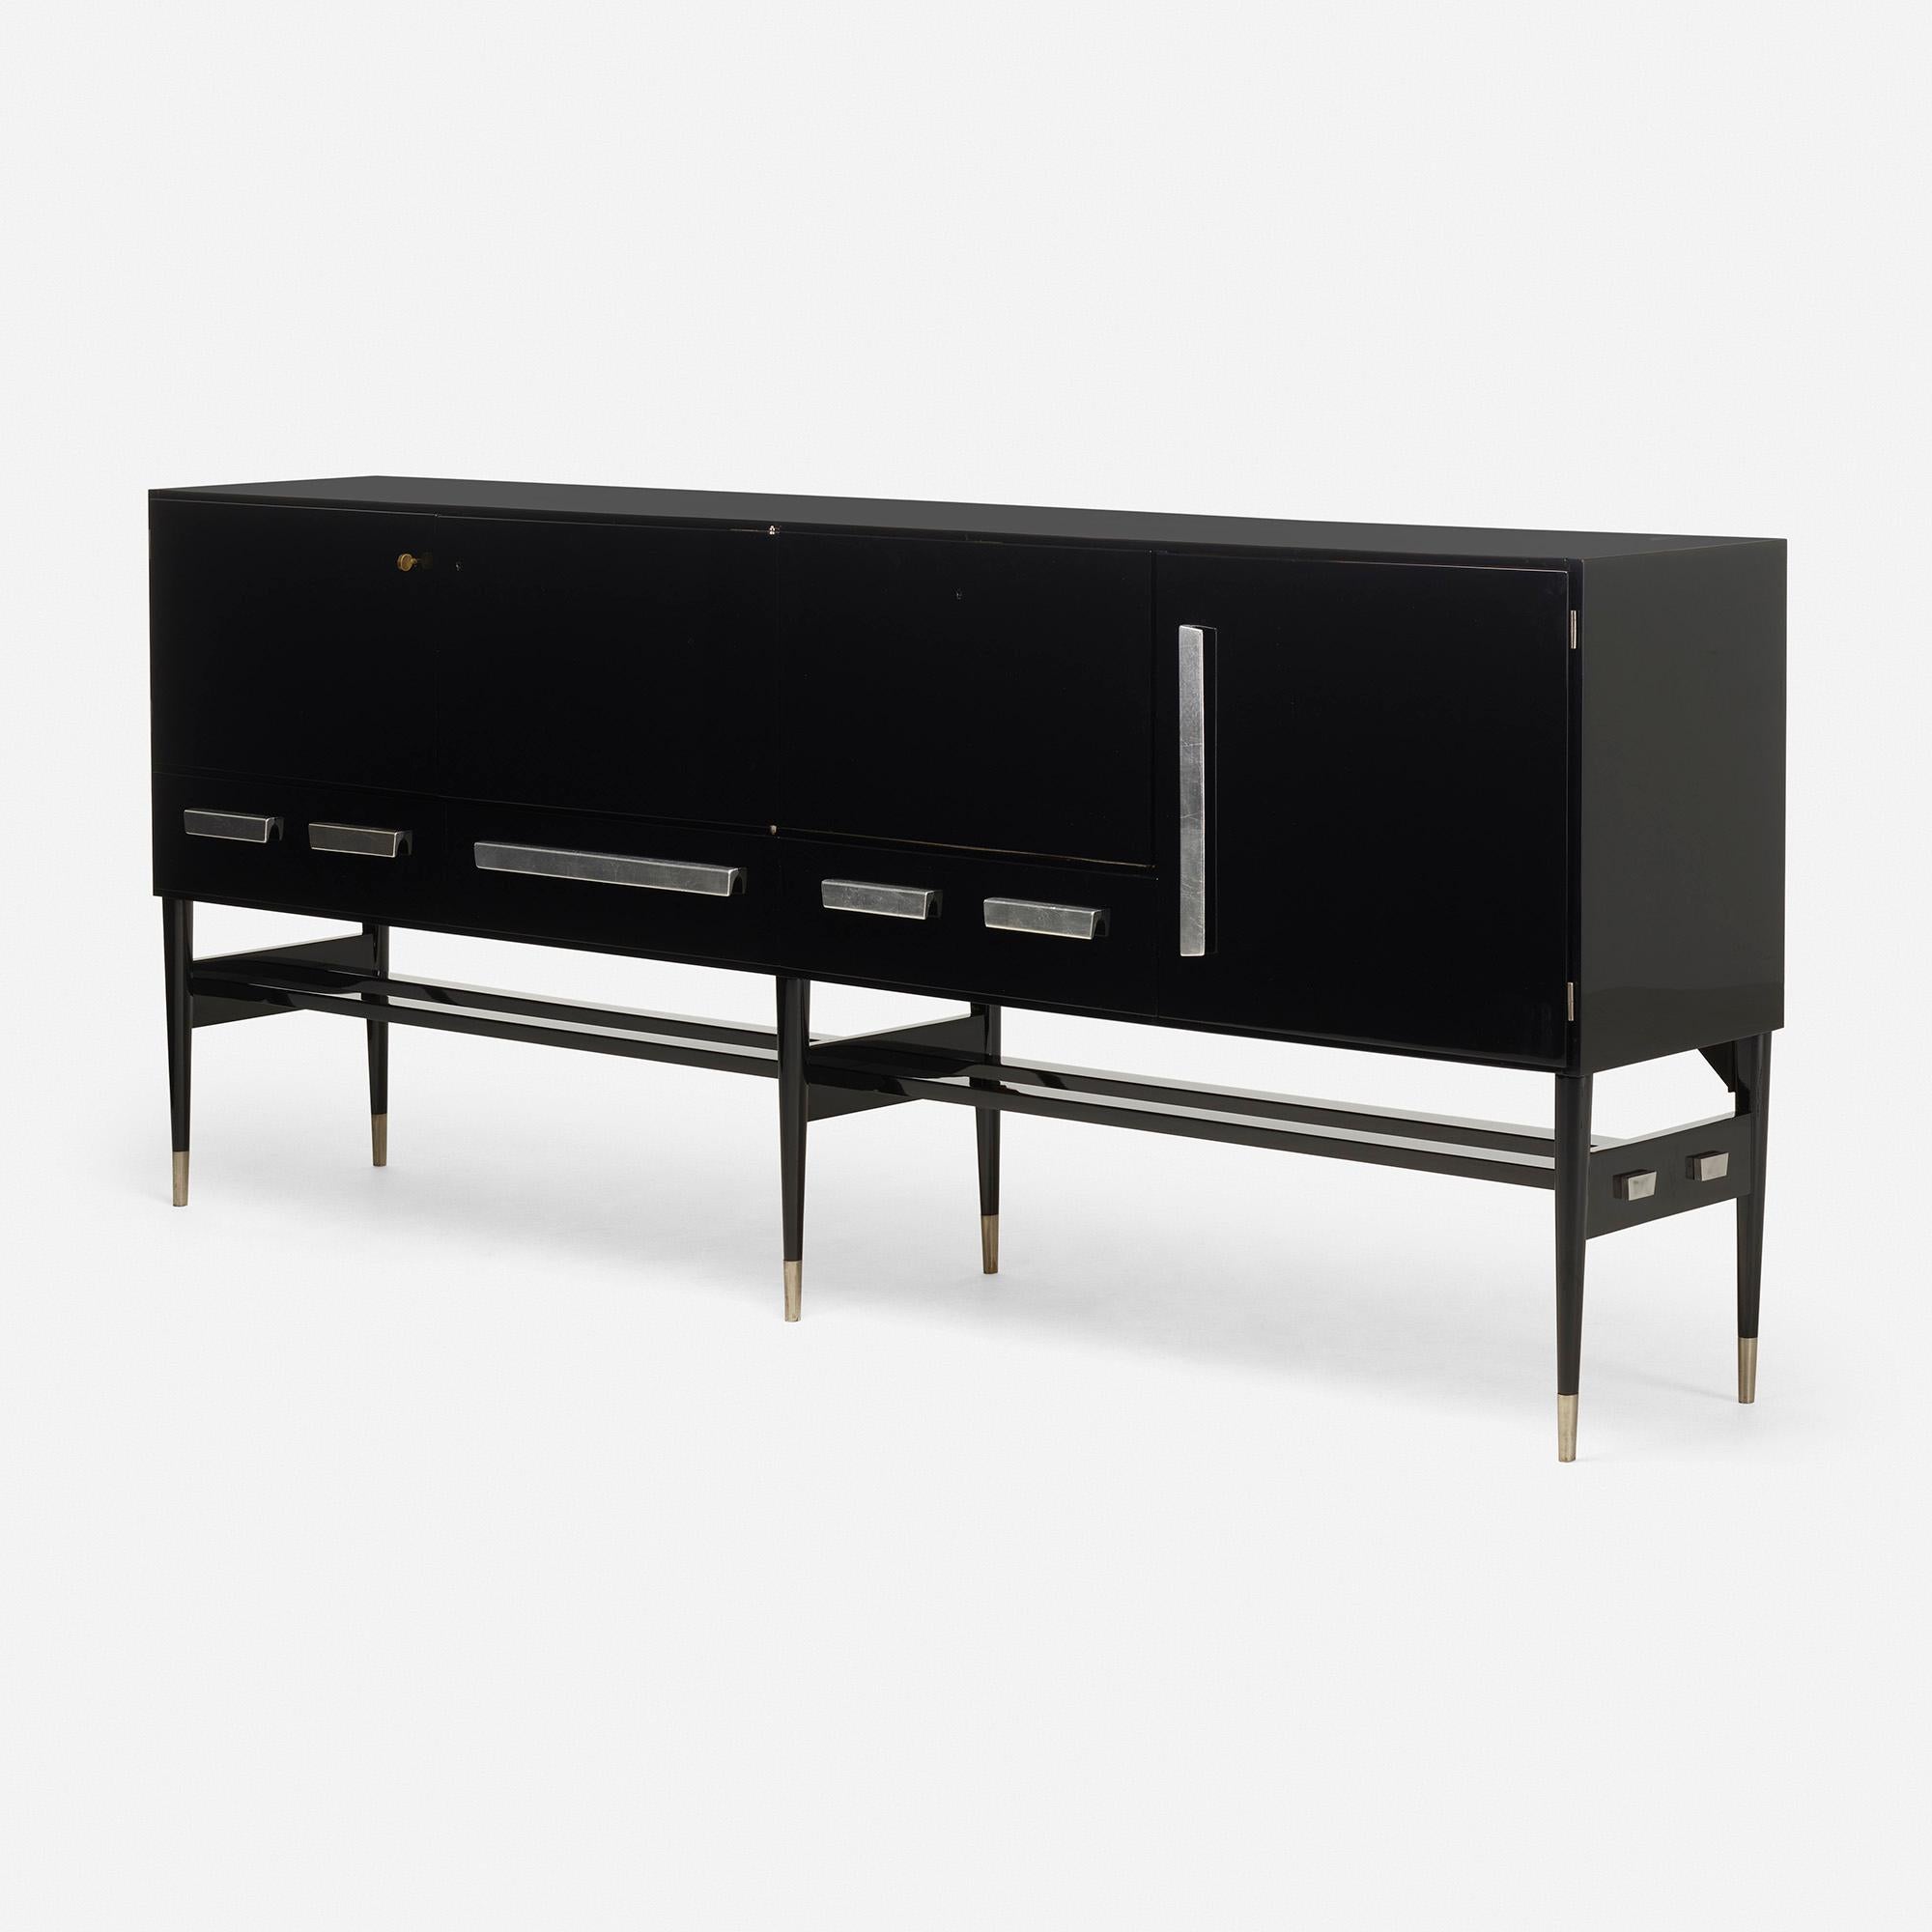 German Lacquered Sideboard by Berner Huwil